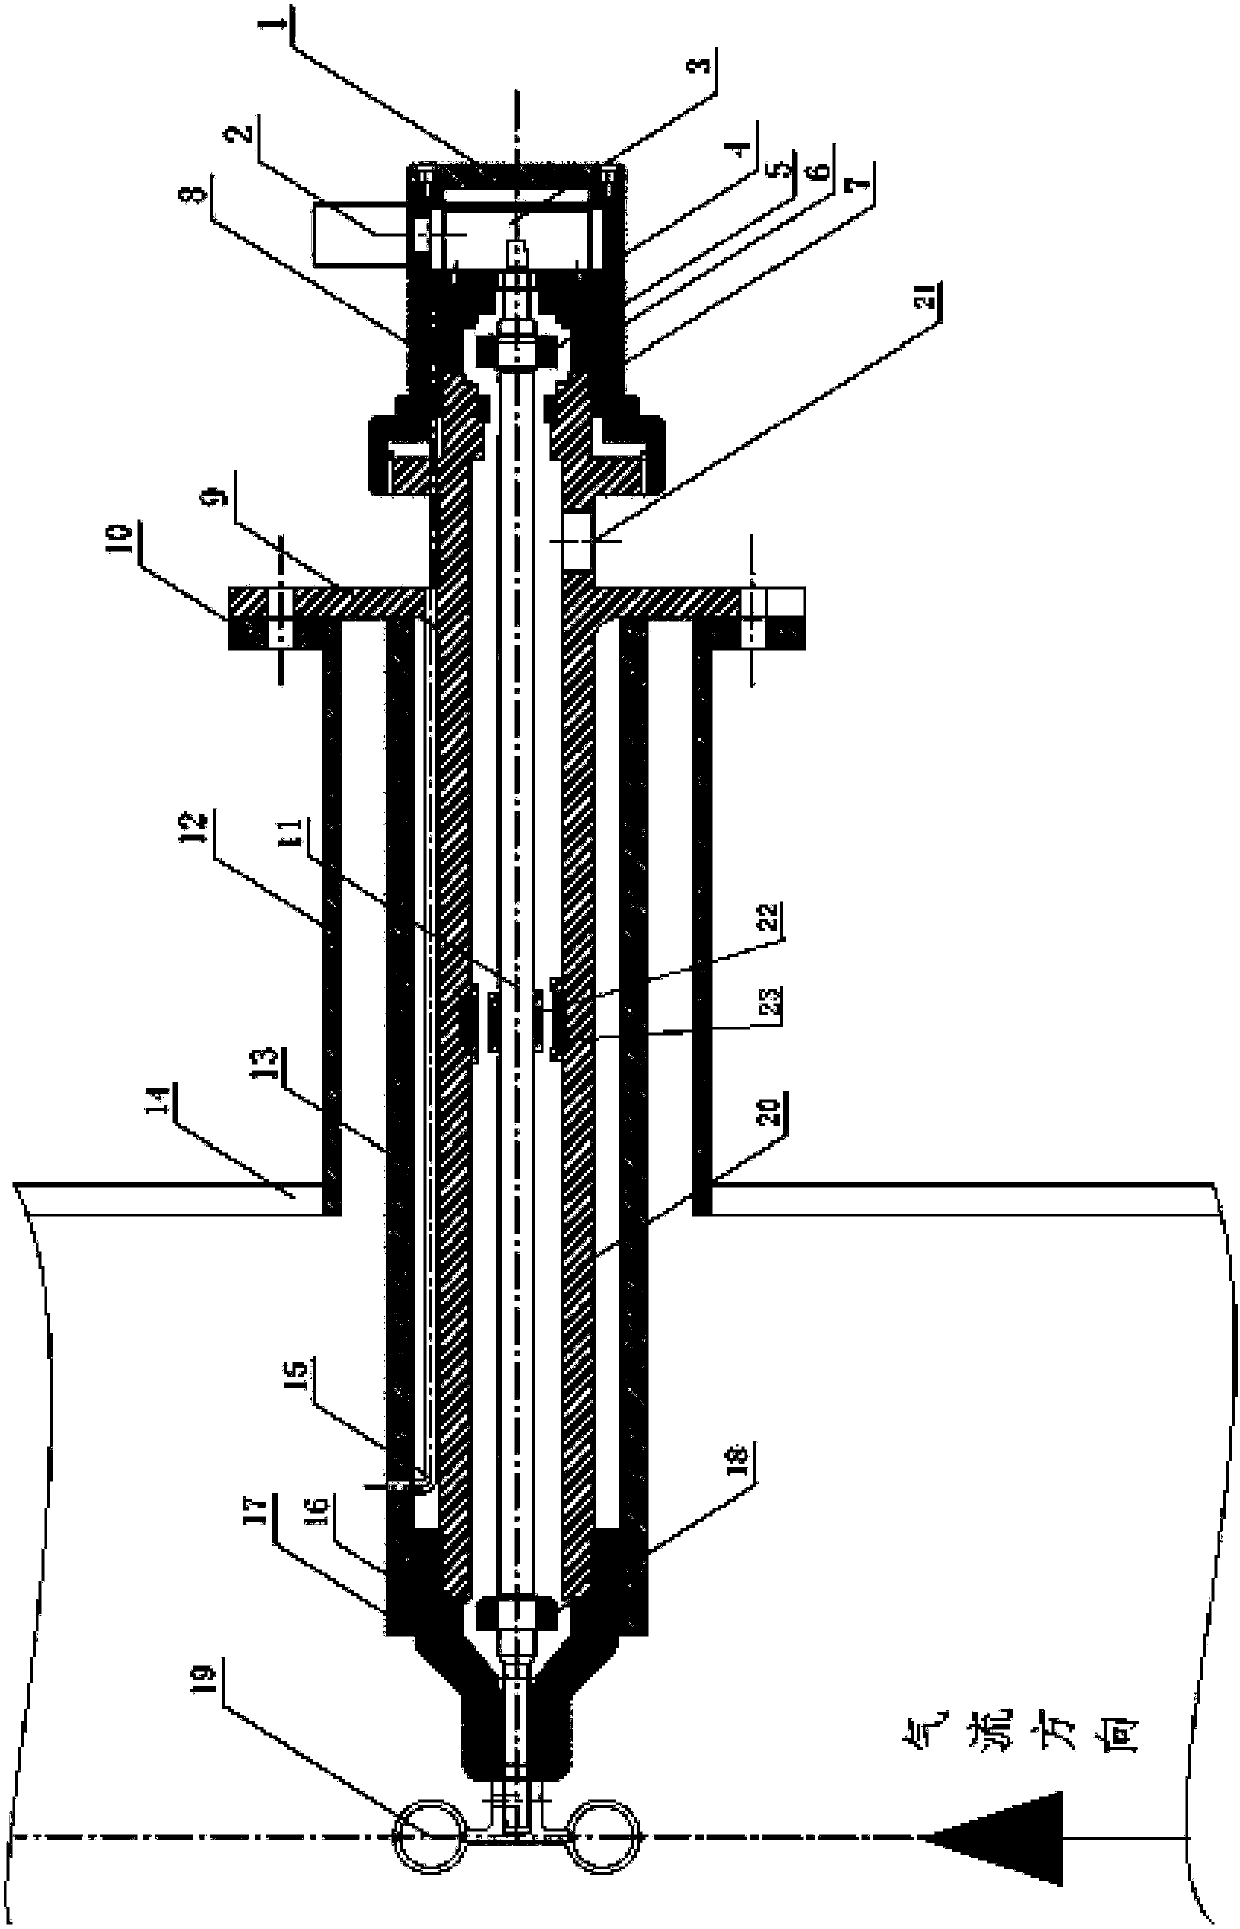 A device for measuring air flow in a pipeline